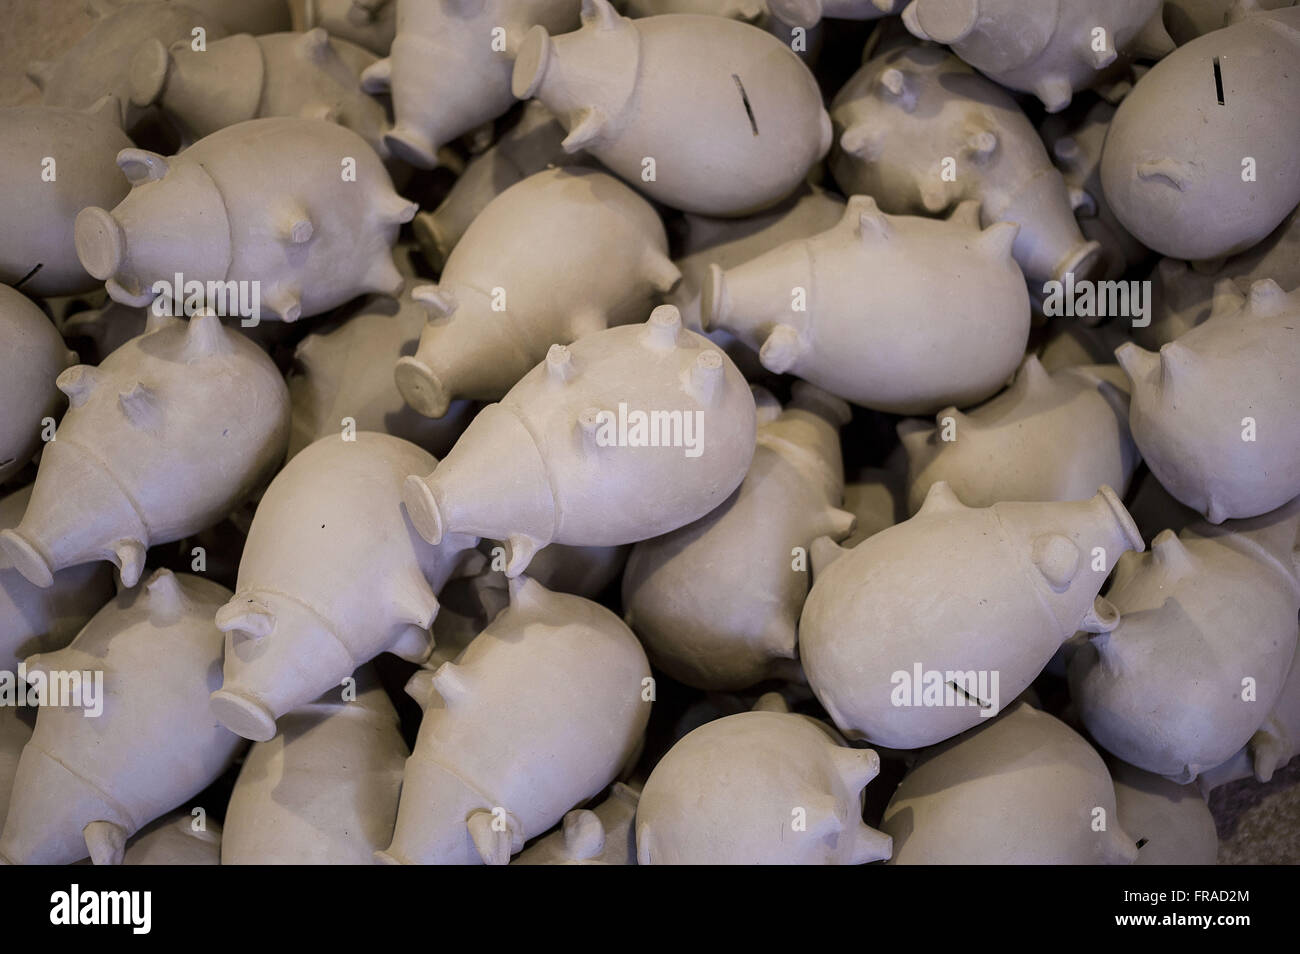 Safes in piglets format made of clay Stock Photo